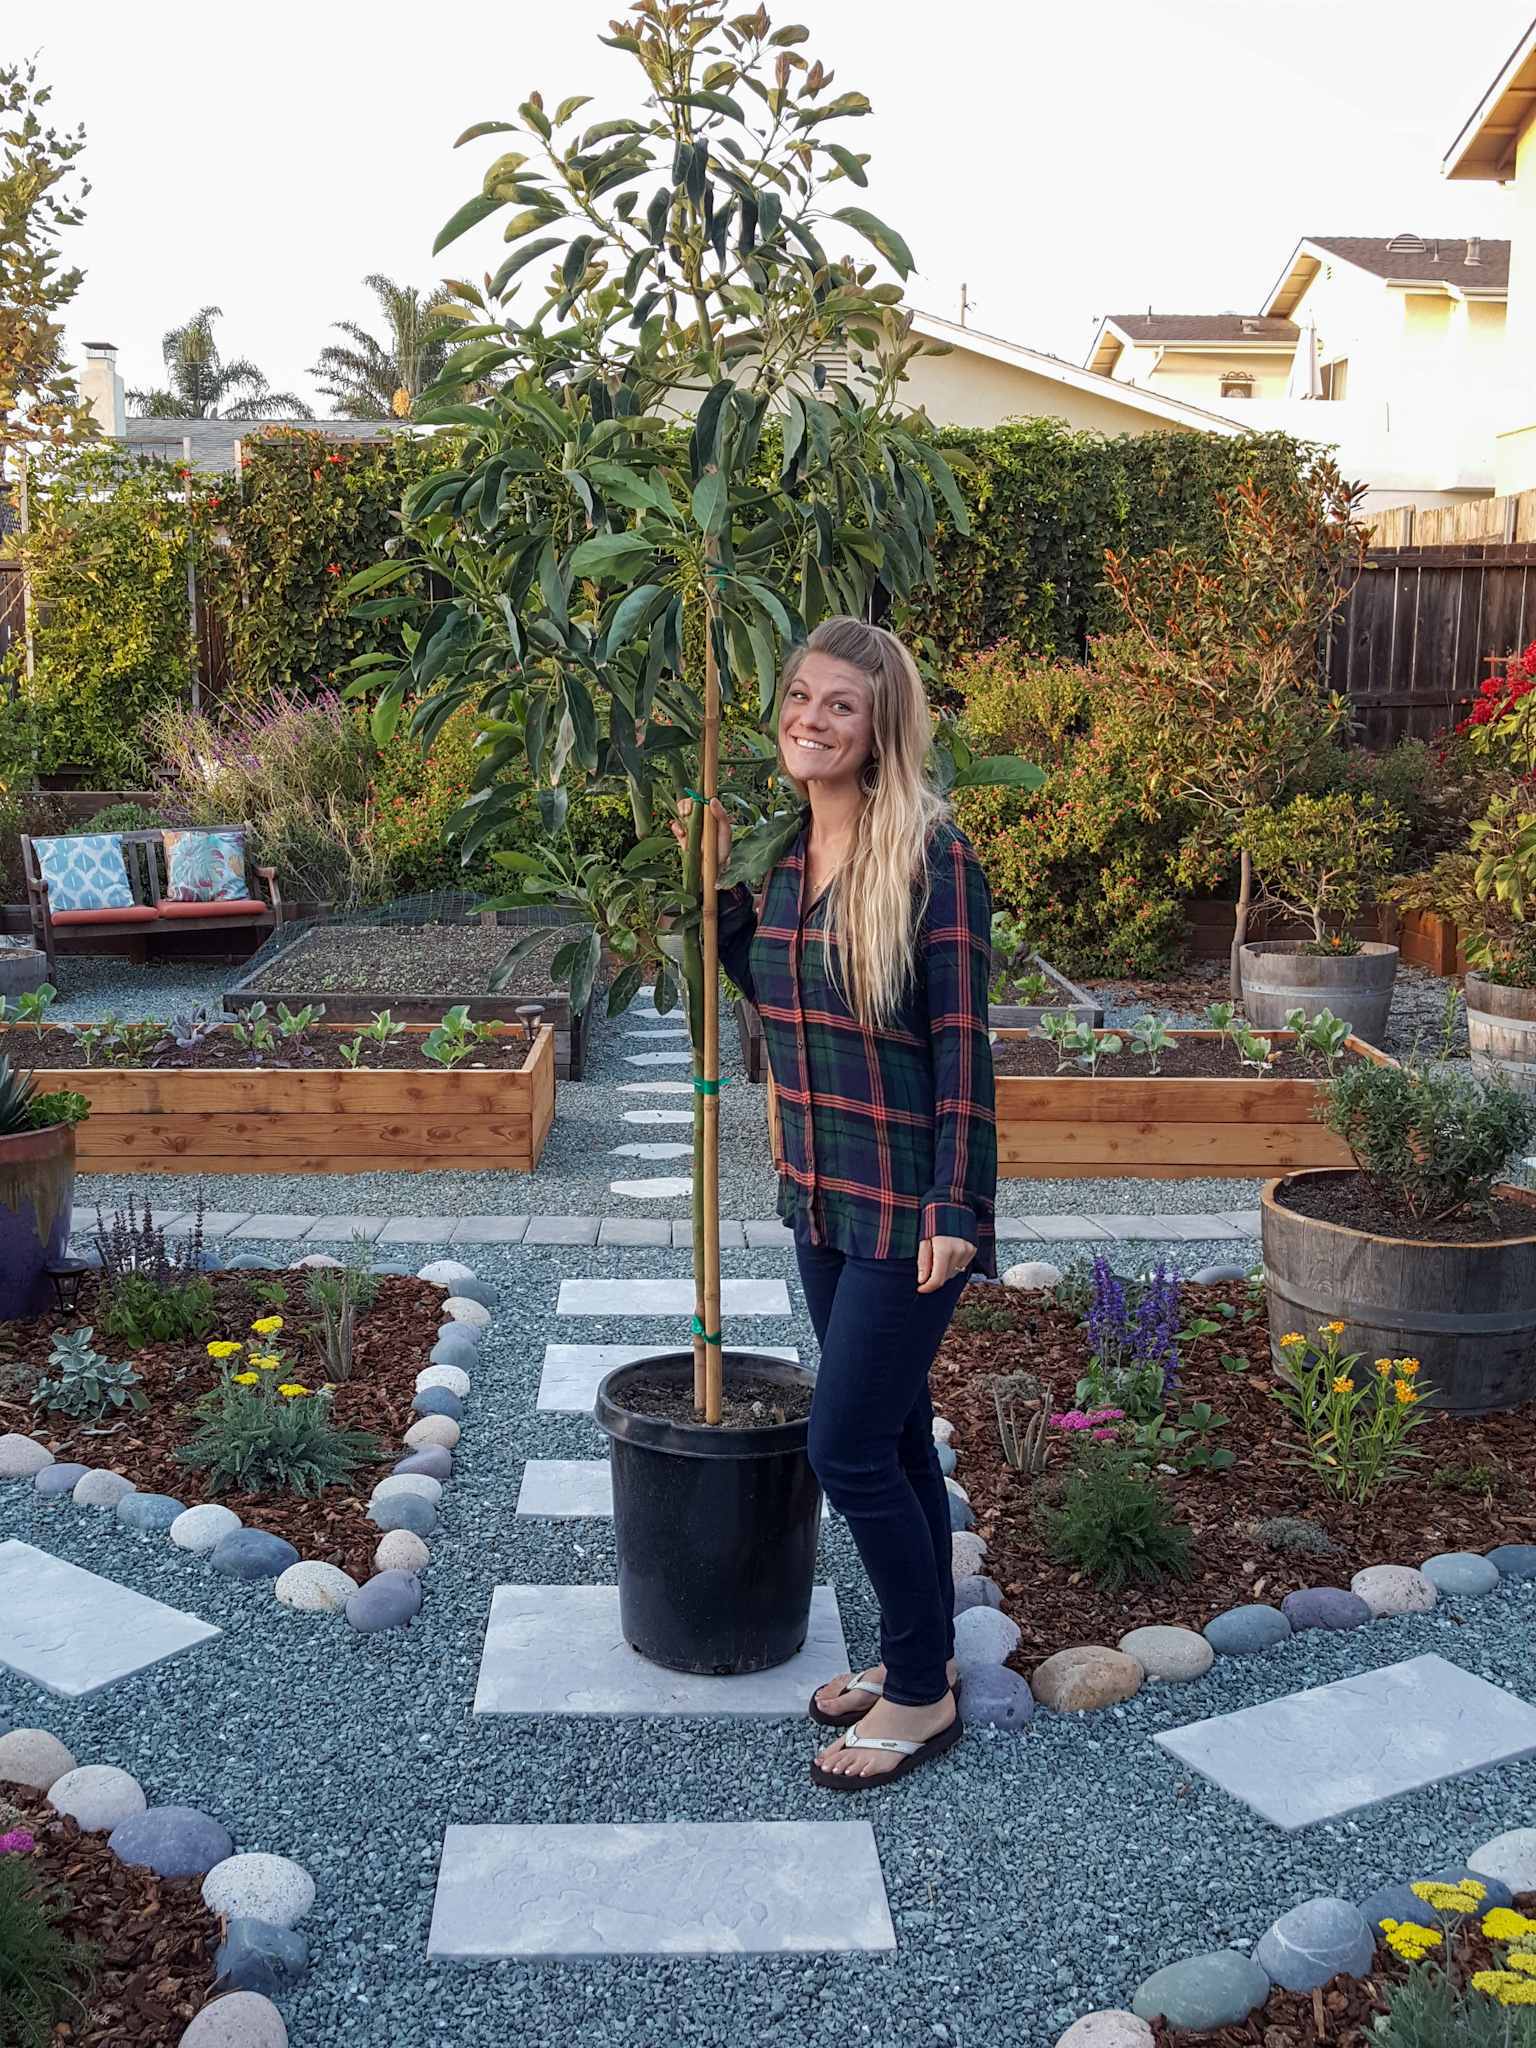 A woman (Deanna, the author of this article) stands with a newly purchased Hass avocado that is in a 15 gallon container. The background shows a yard that contains gravel pathways with stone pavers for steps. There are islands that are lined with river cobble stone that contain perennial plants that are mulched with bark. Further behind that contains raised garden beds for vegetables, perennials of numerous varieties, as well as a wall of passion vines that are alongside the far wooden fence line.  